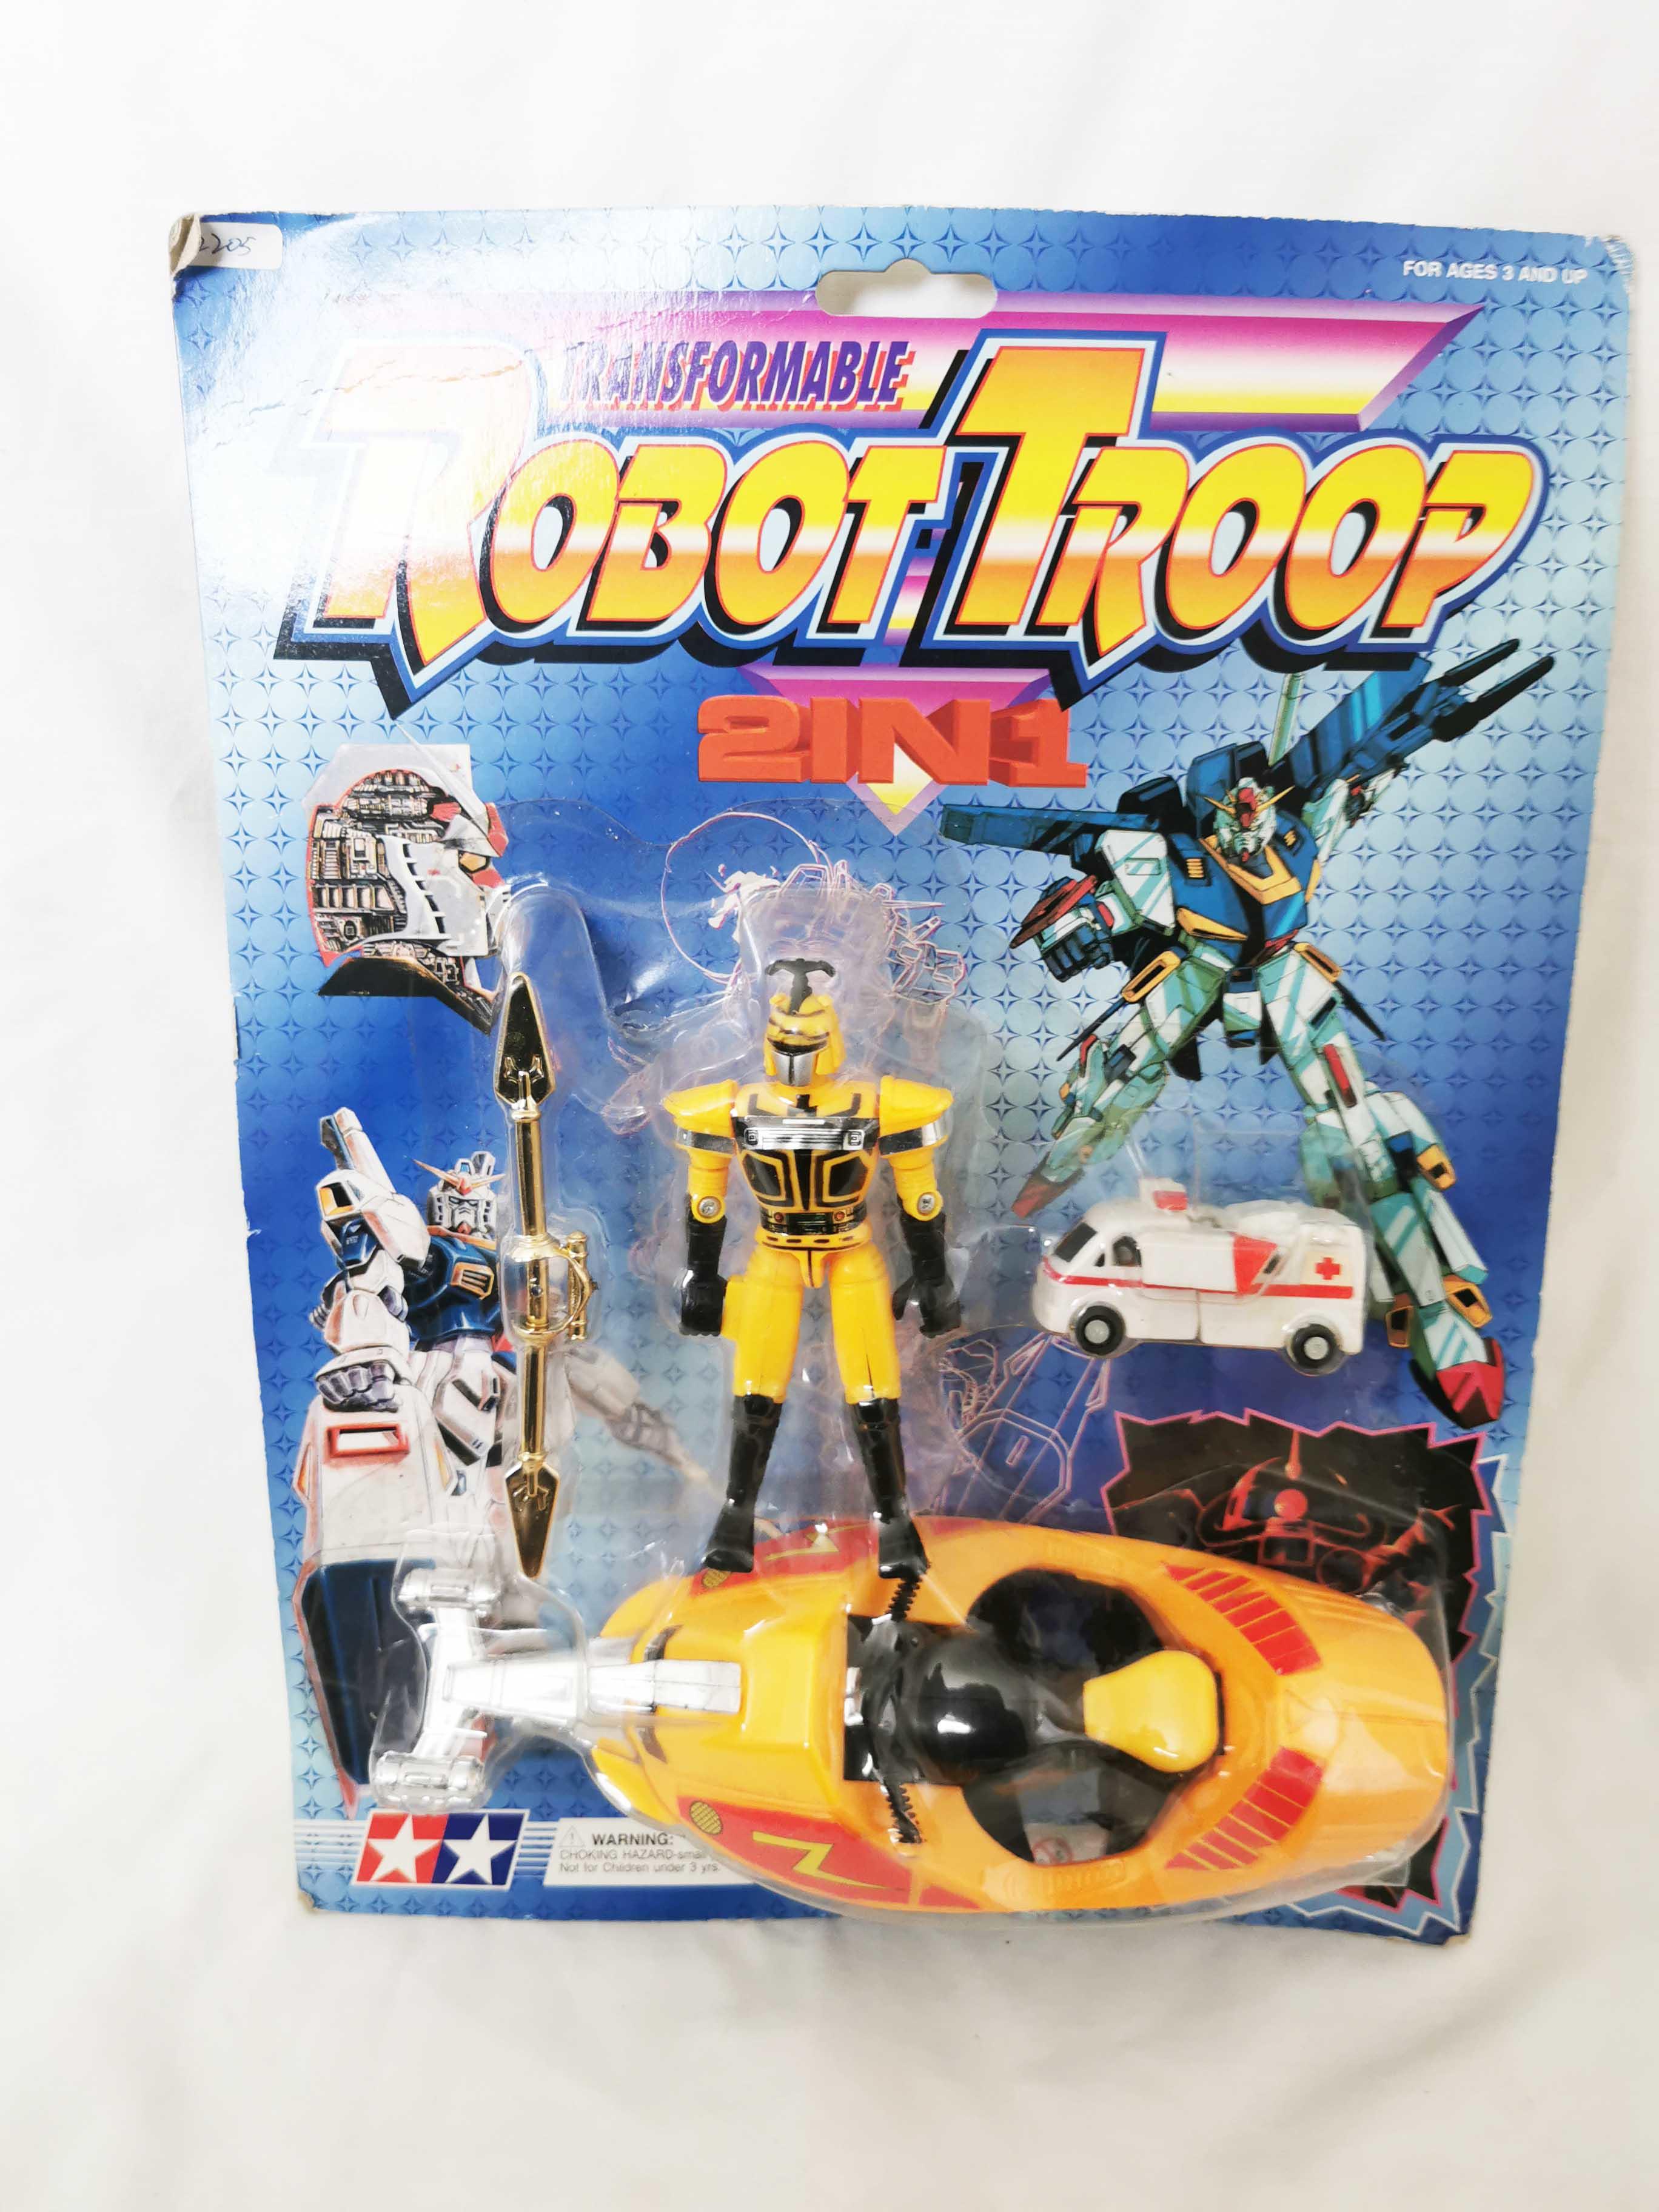 Transformable Robot Troop 2 in 1 rare KO toy power rangers  transformer style